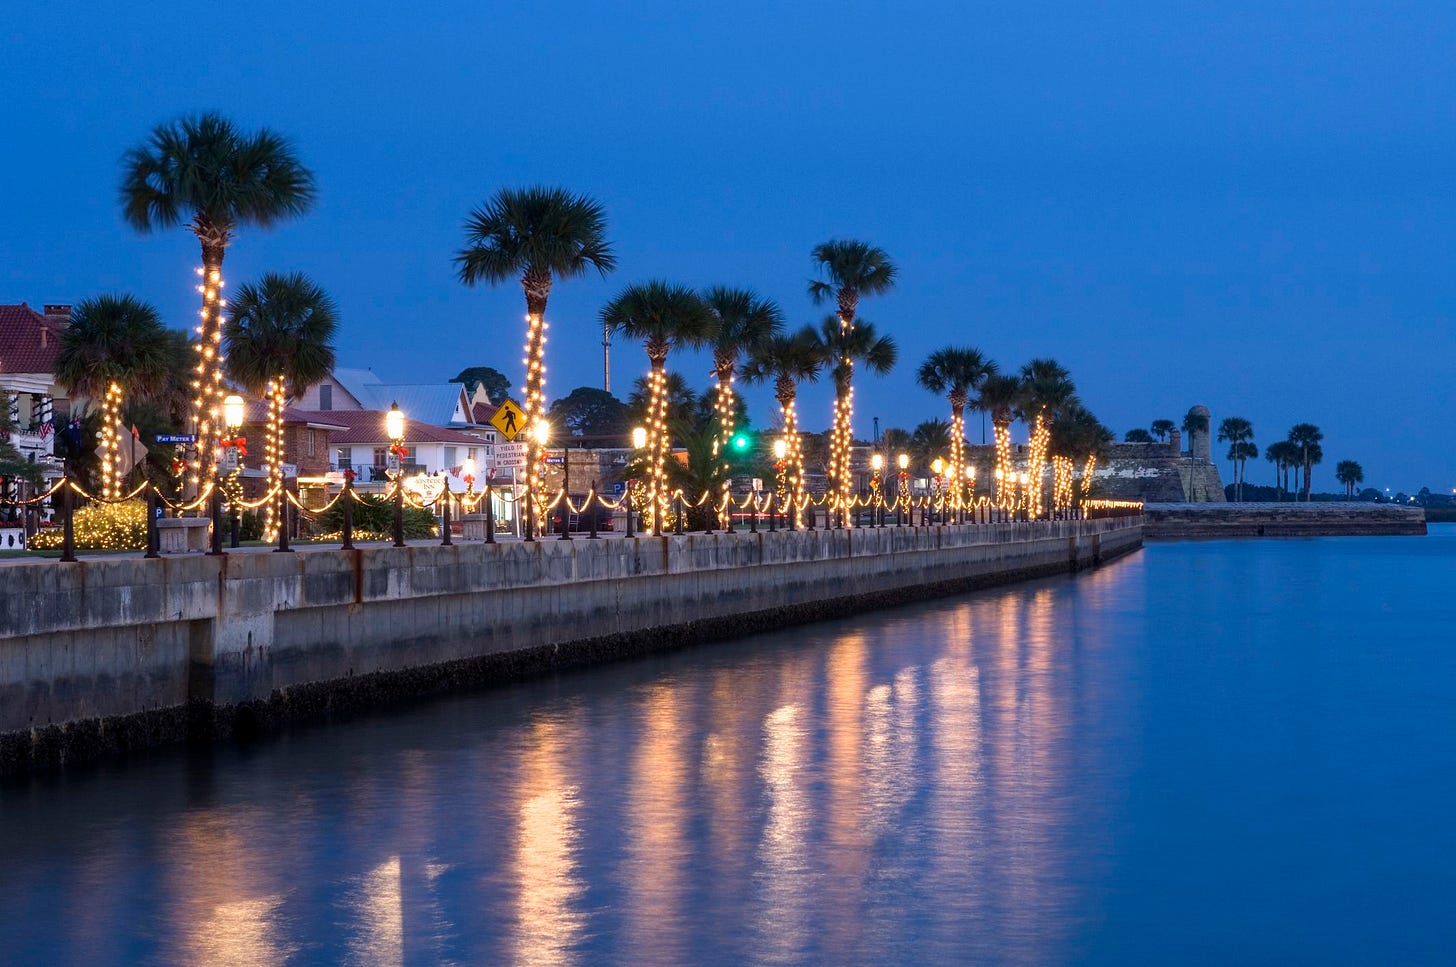 Things to Do for Christmas in Florida